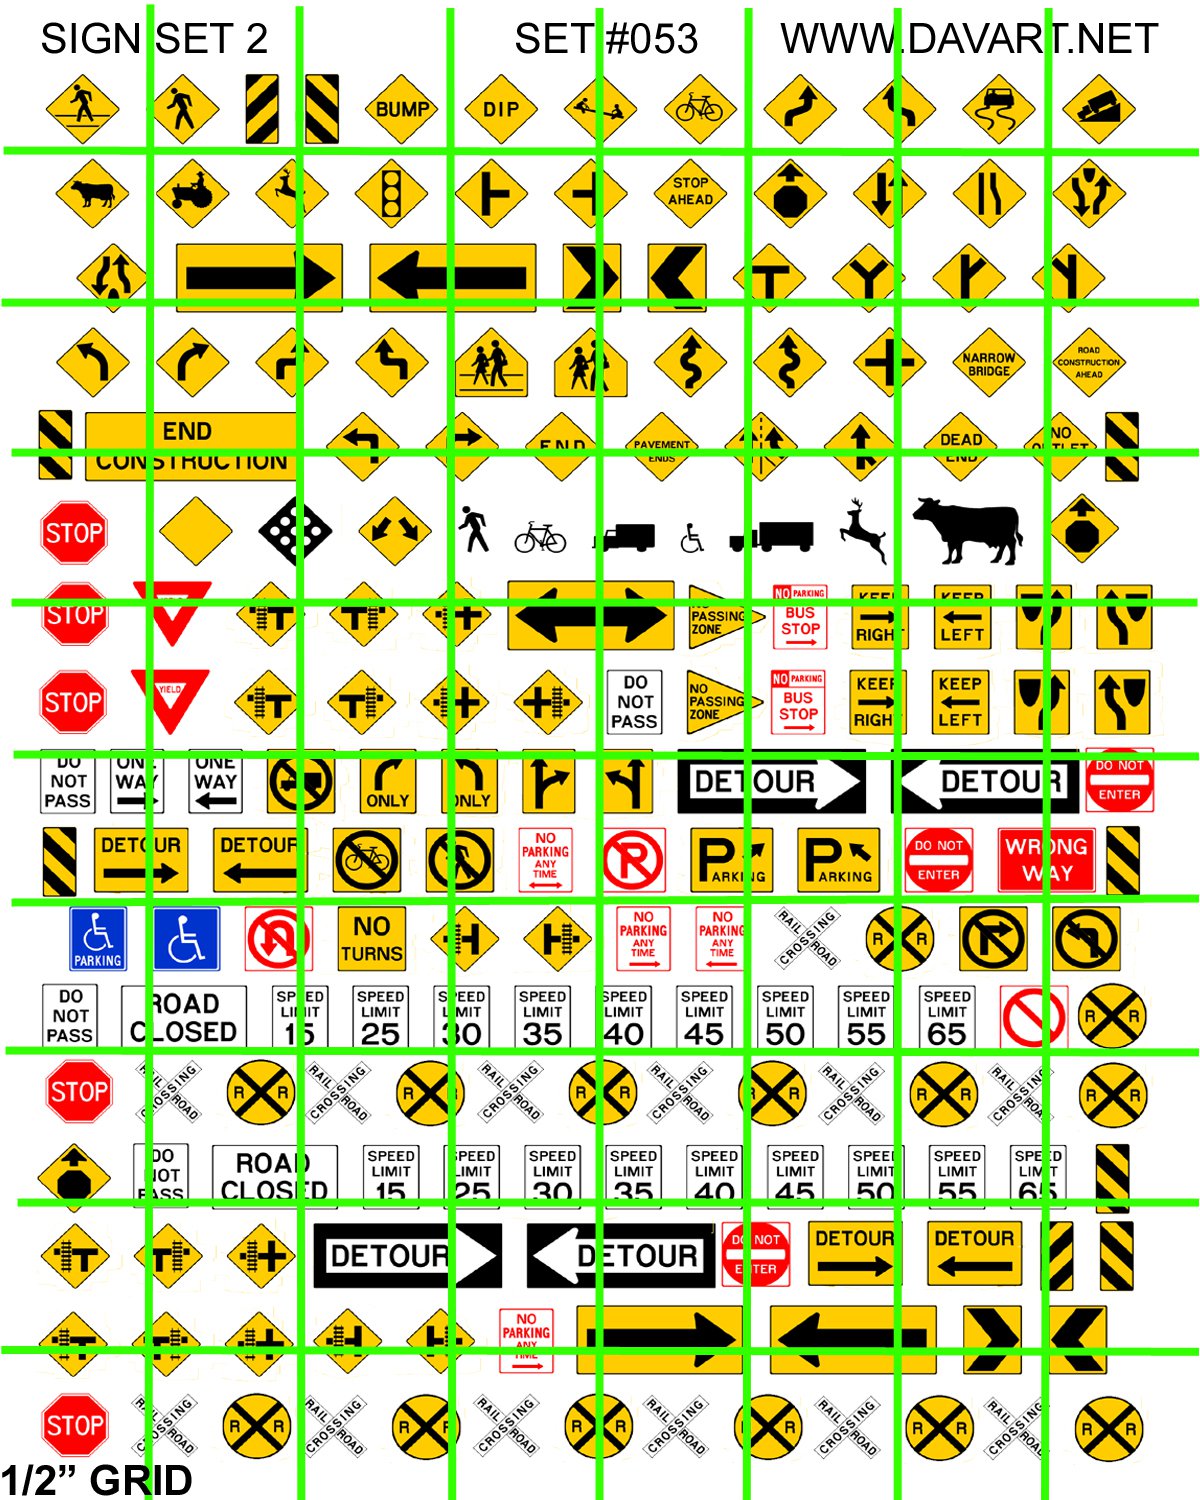 9001 - Sign Set 1 HO SCALE ROAD SIGNS AMERICAN US